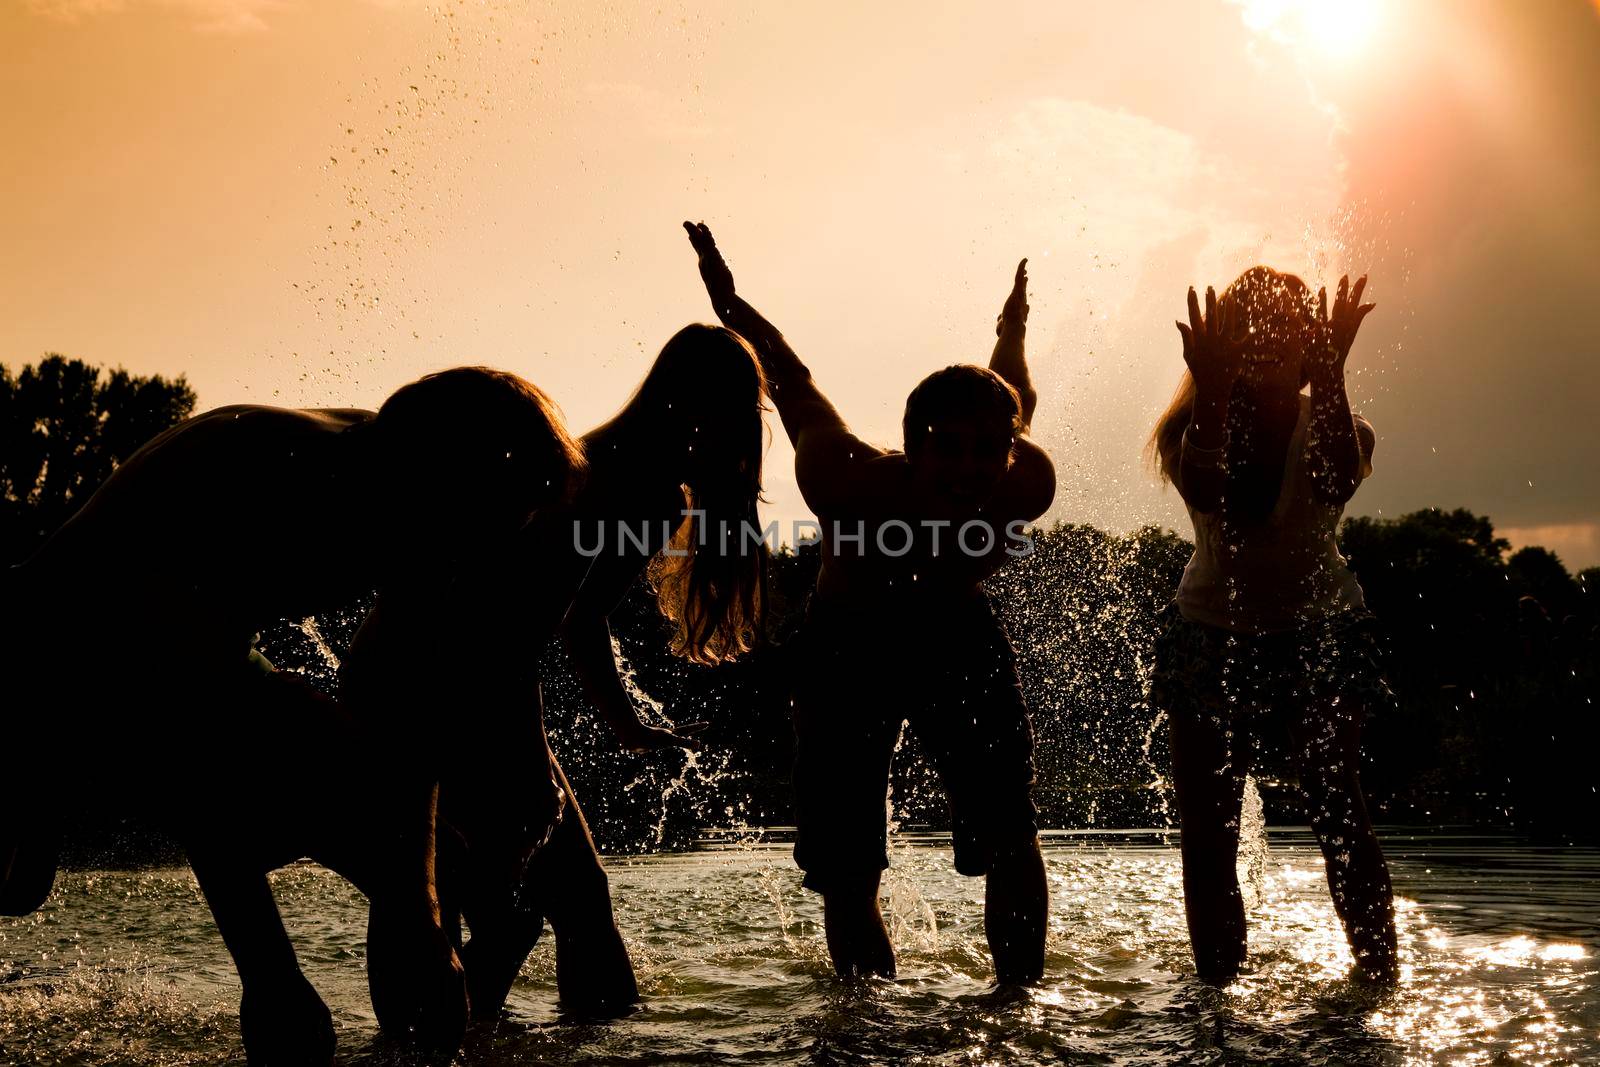 People (two couples) feeling very free in the sunset standing in the water splashing water at each other having an unbelievable amount of fun. Silhouettes